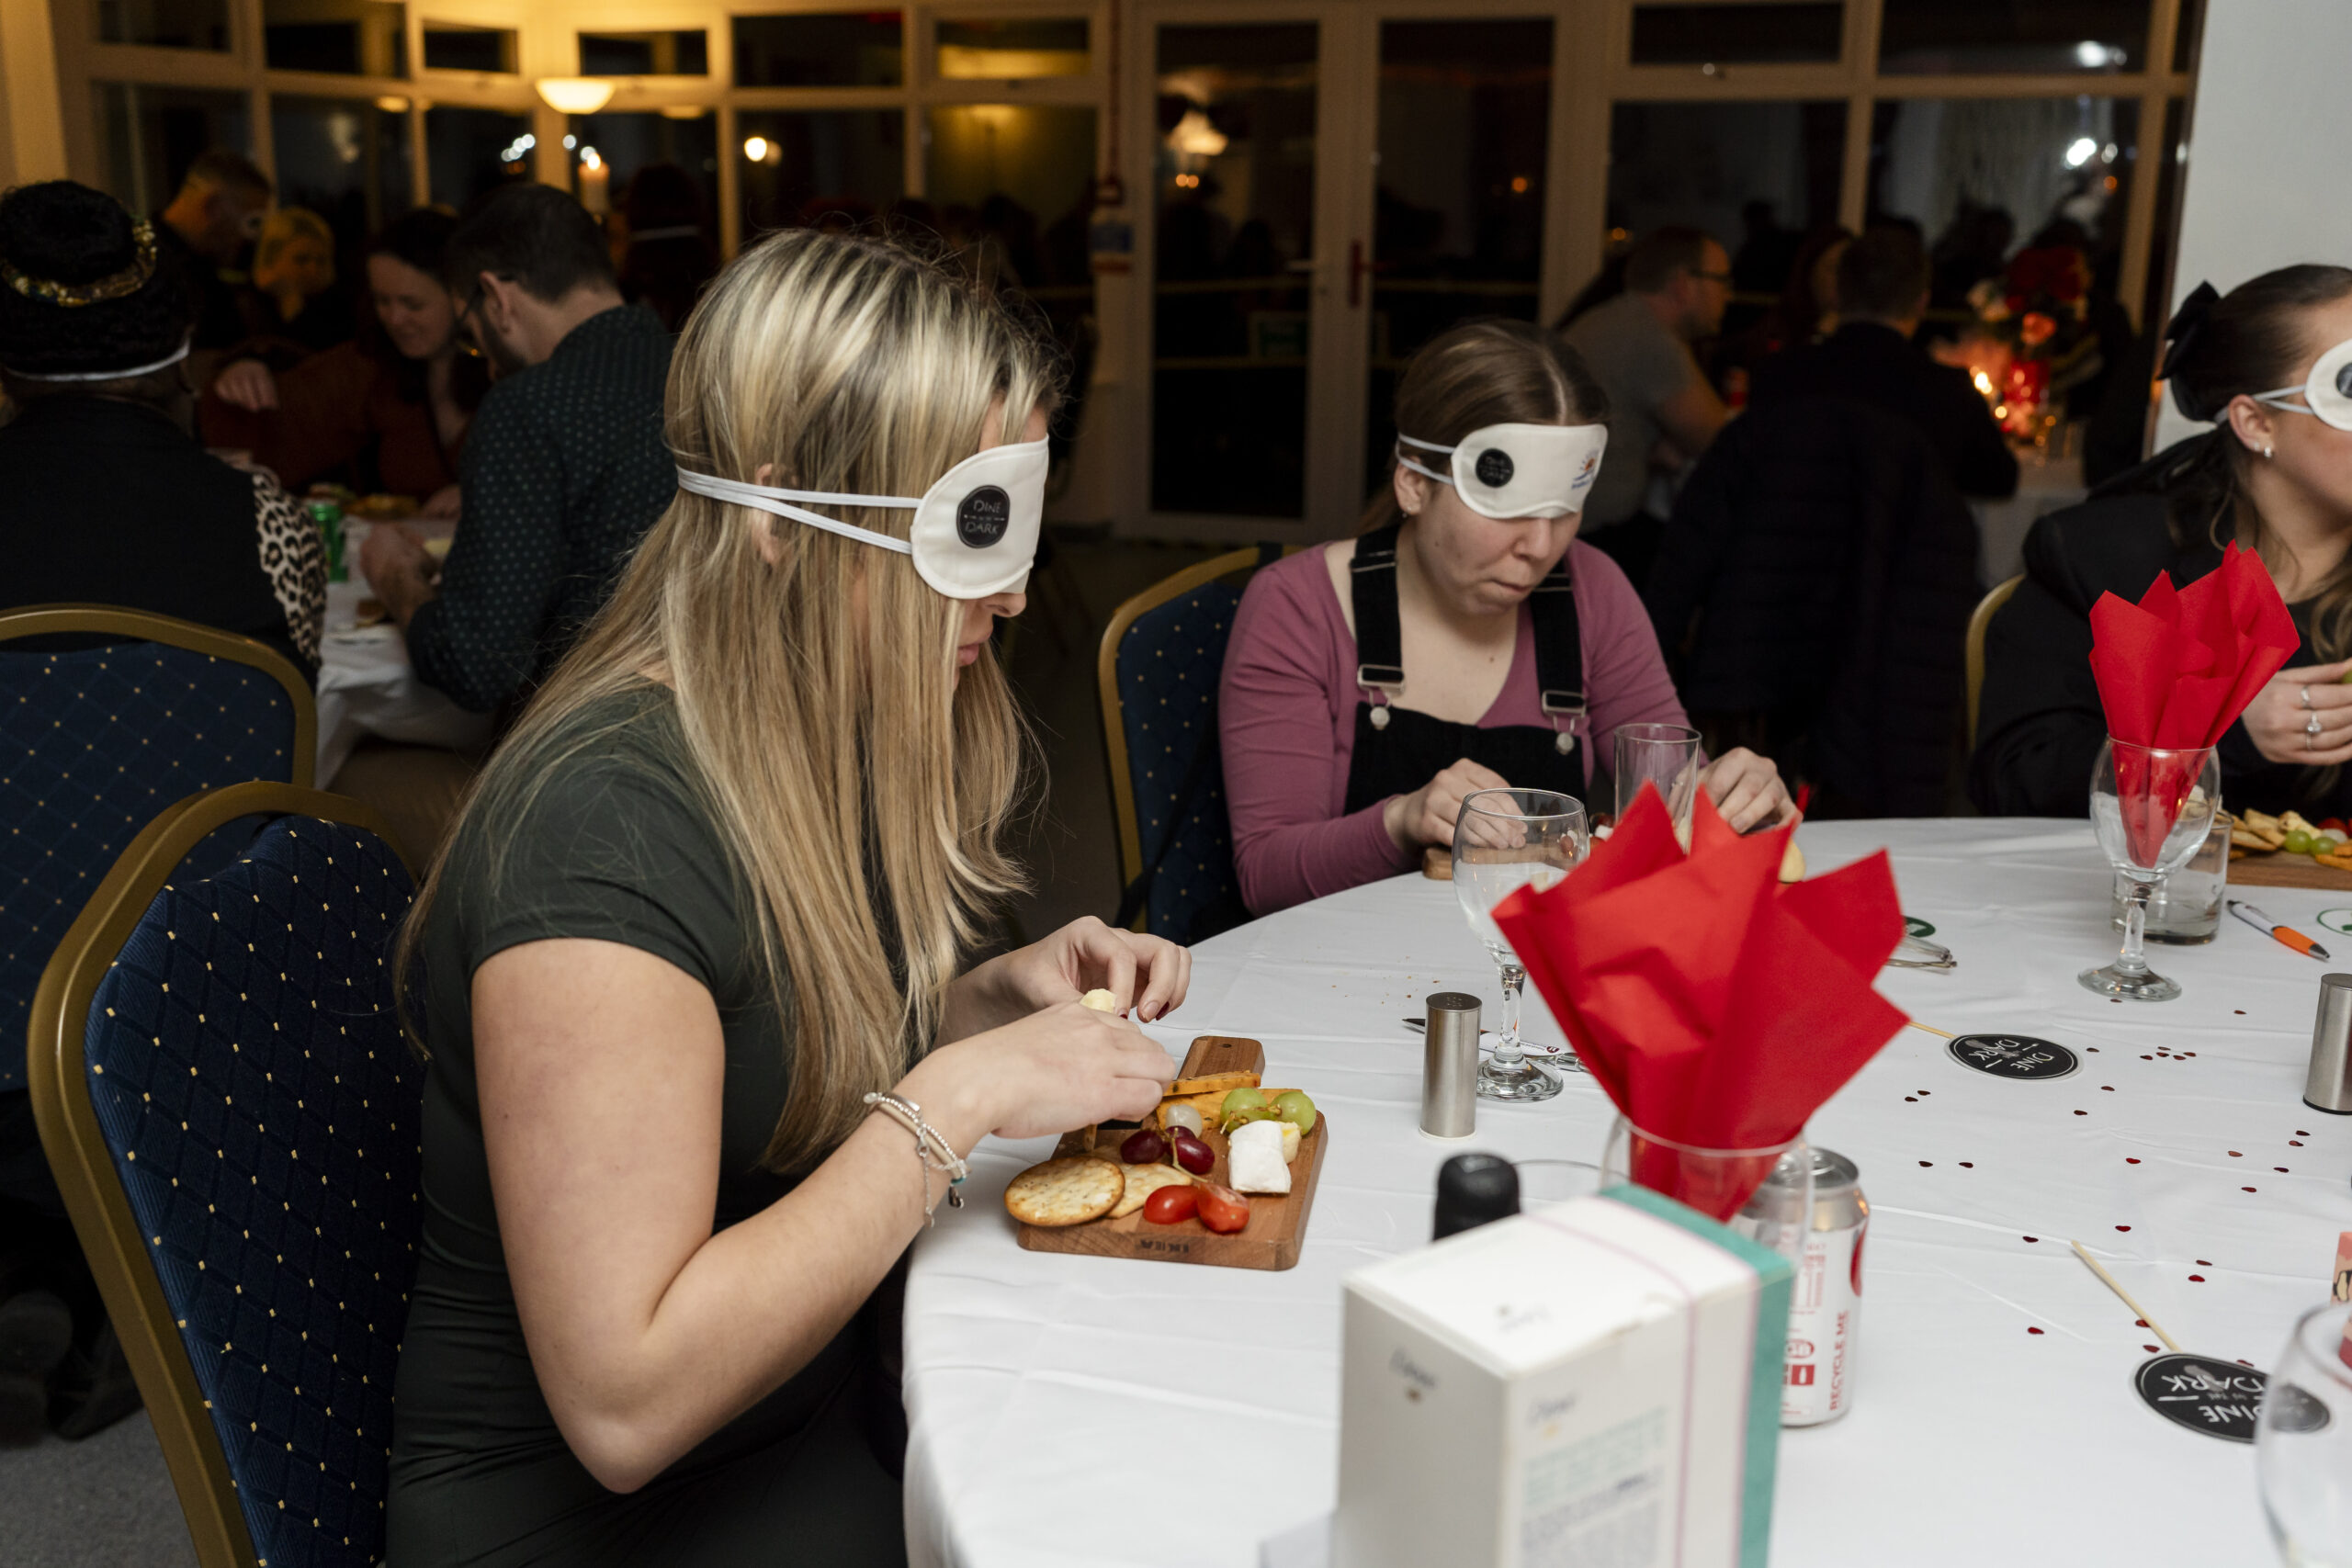 http://Two%20people%20sat%20at%20a%20table%20wearing%20blindfolds%20and%20eating%20from%20cheese%20boards.